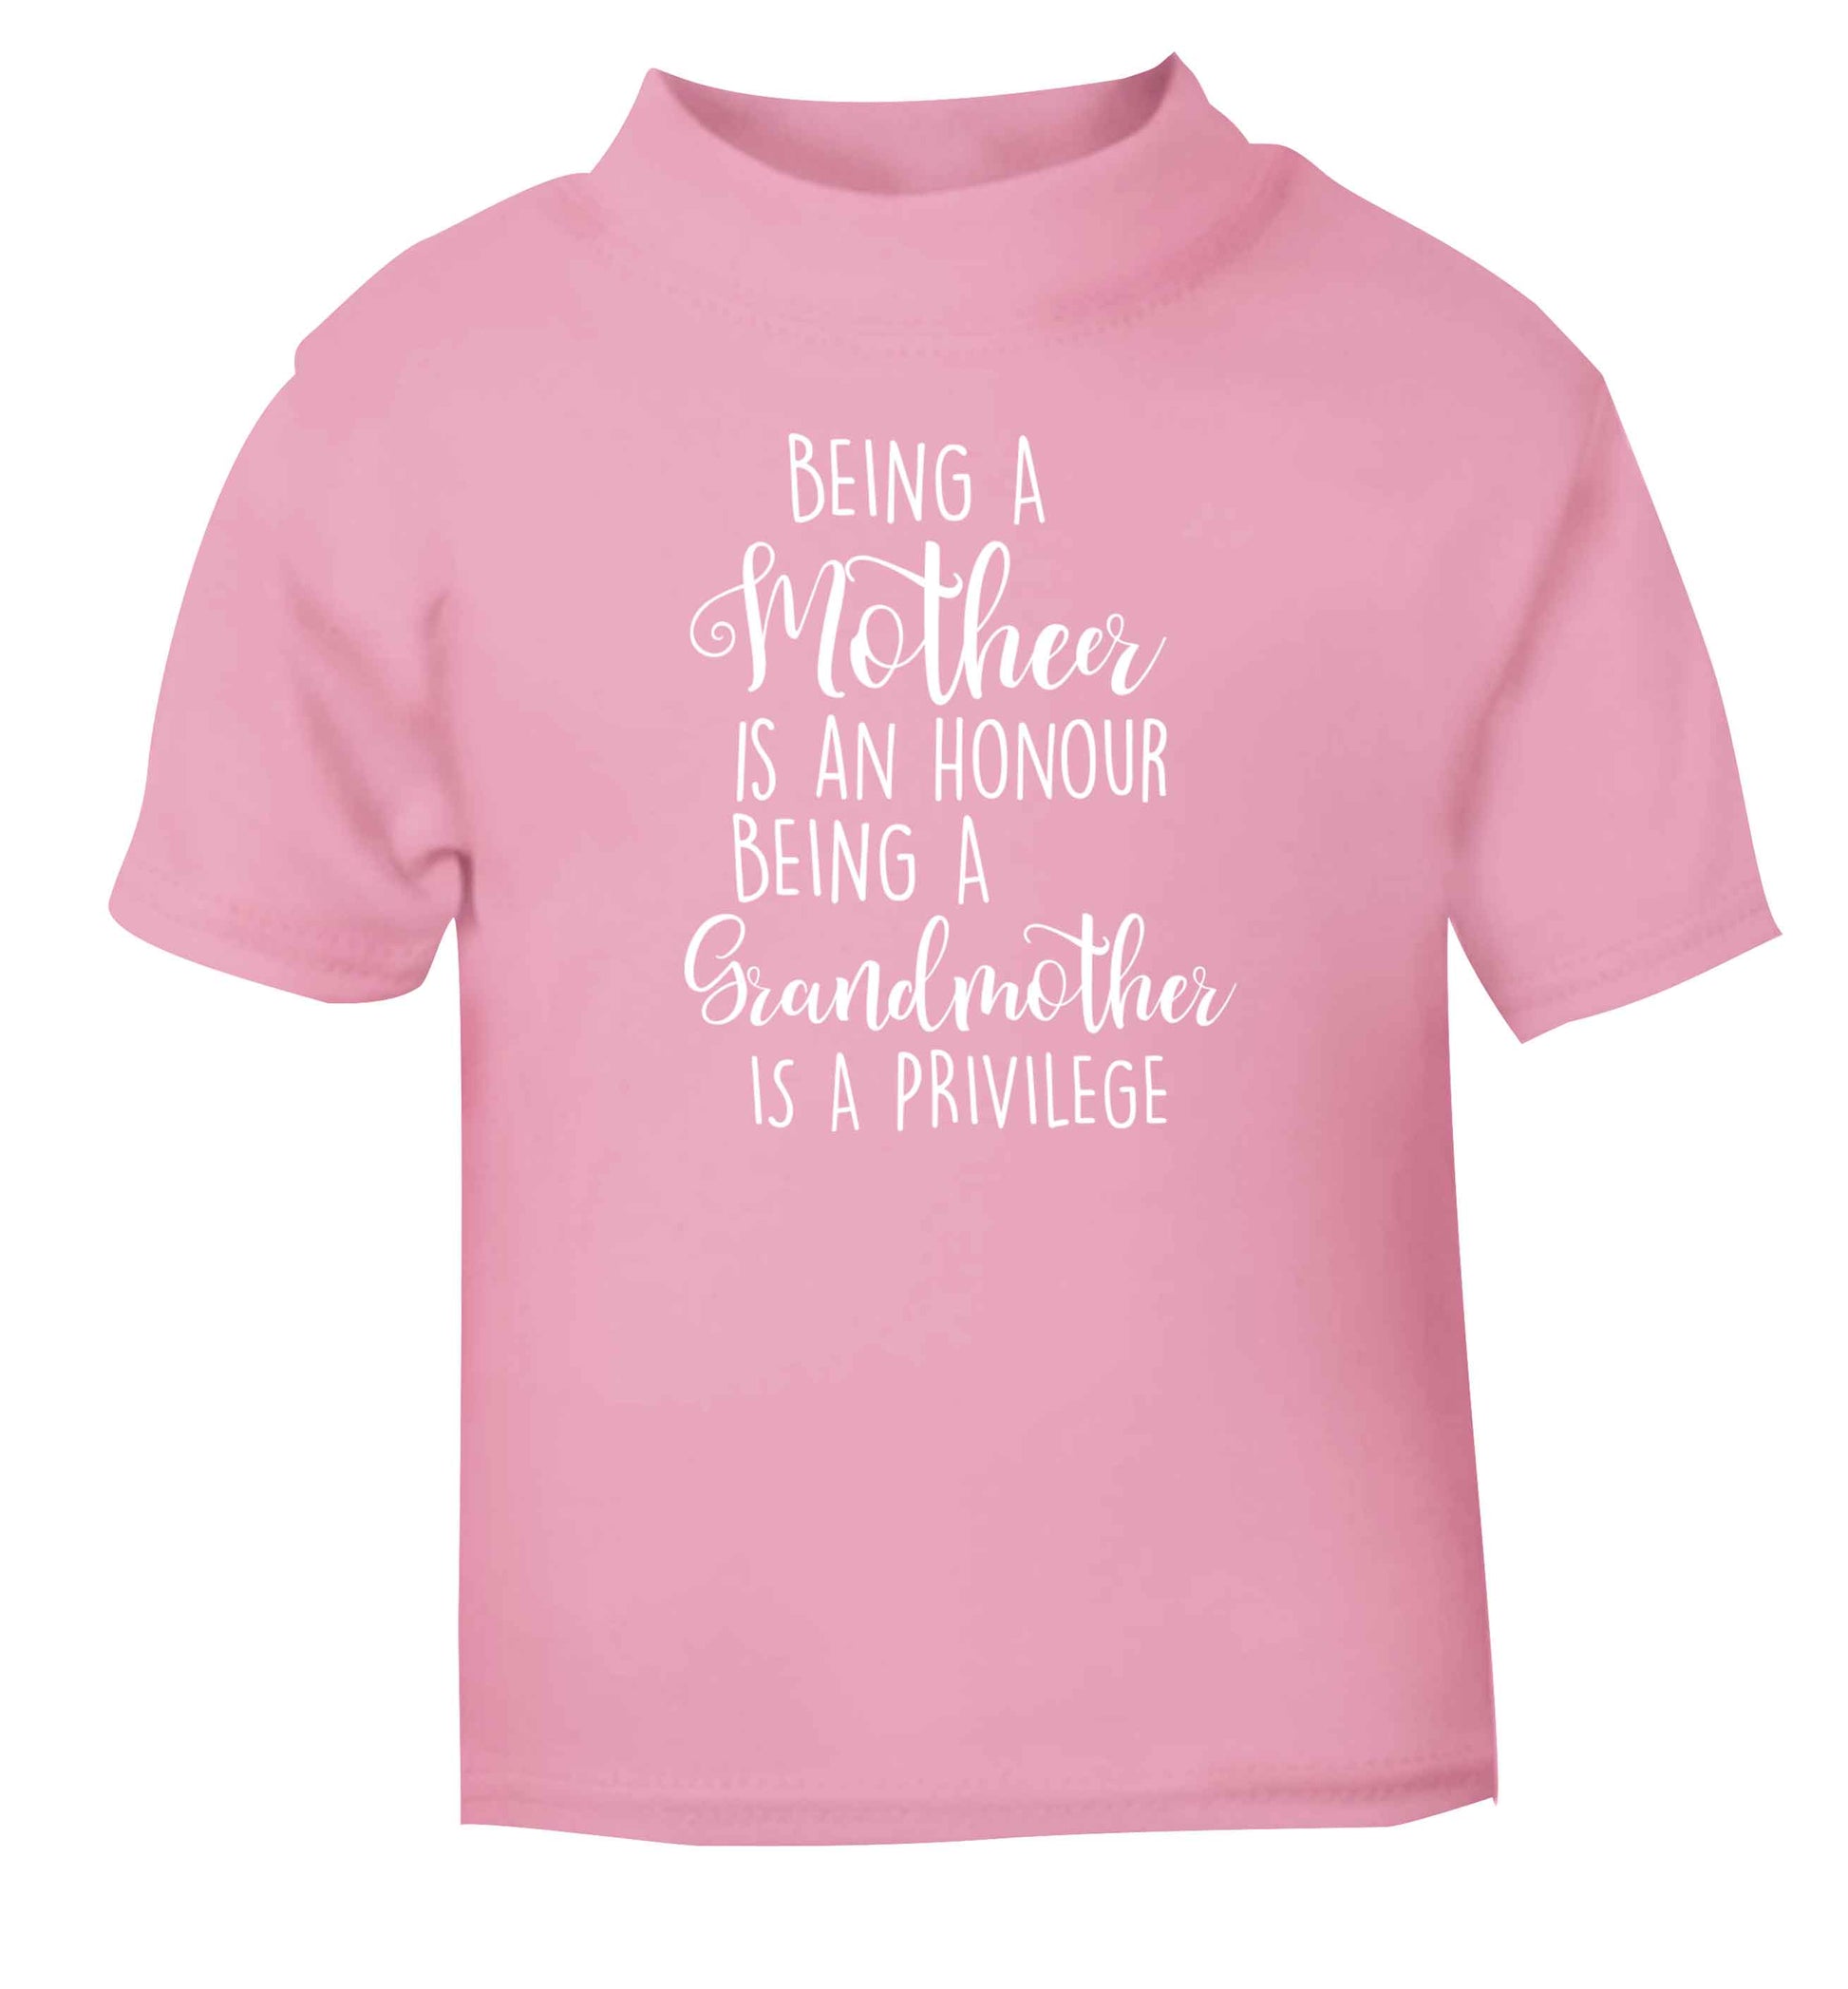 Being a mother is an honour being an grandmother is a privilege light pink Baby Toddler Tshirt 2 Years